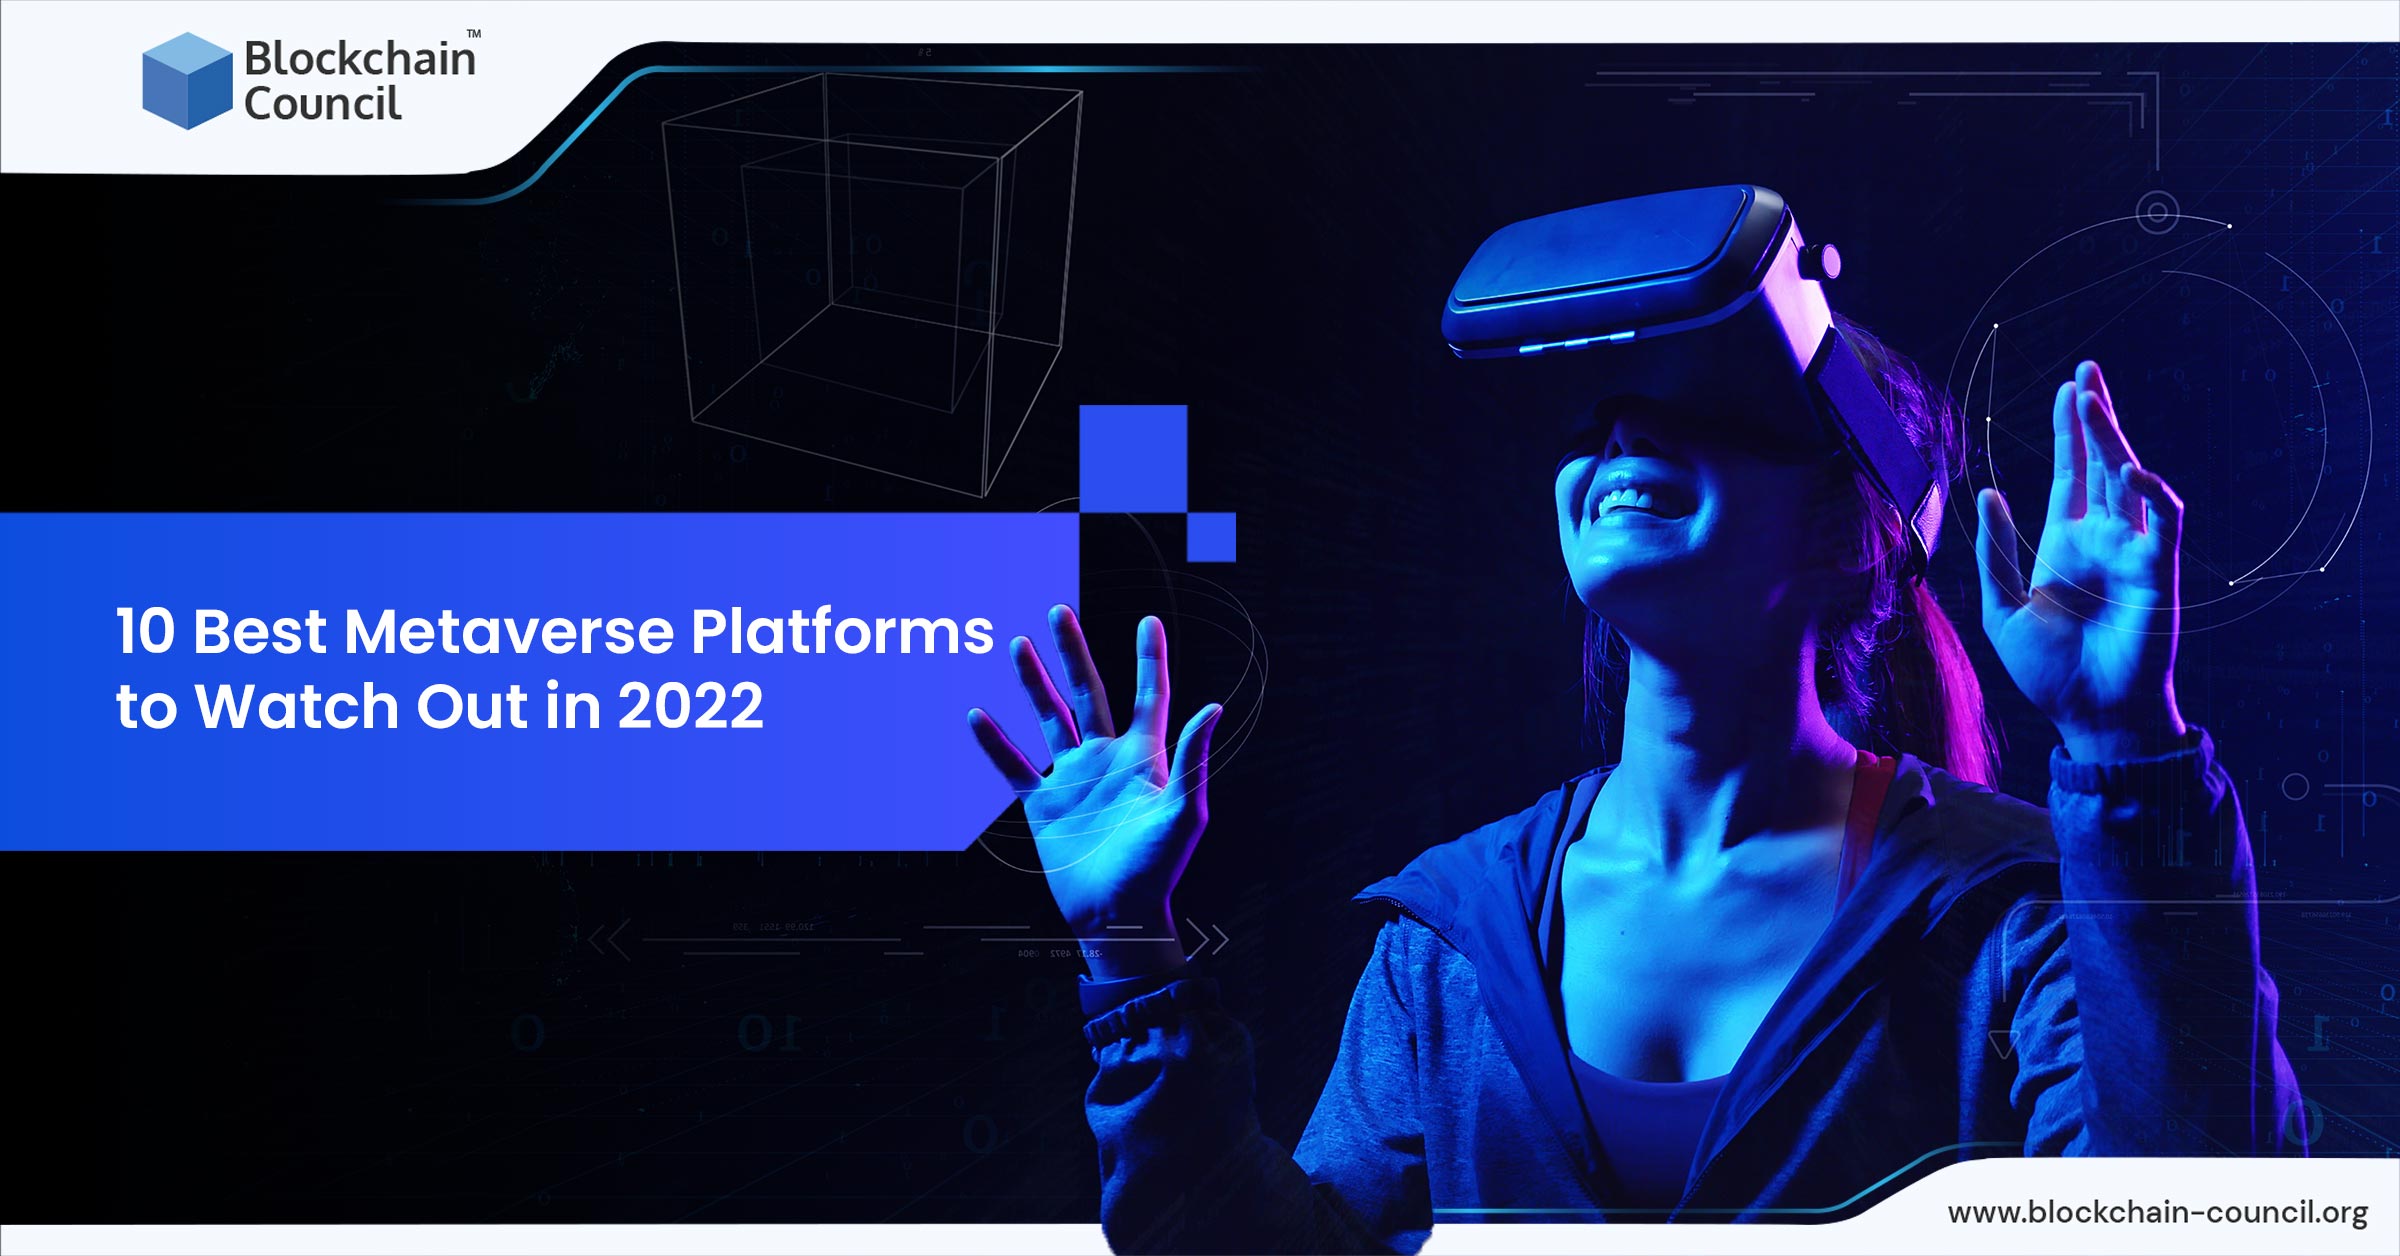 10 Best Metaverse Platforms to Watch Out in 2022